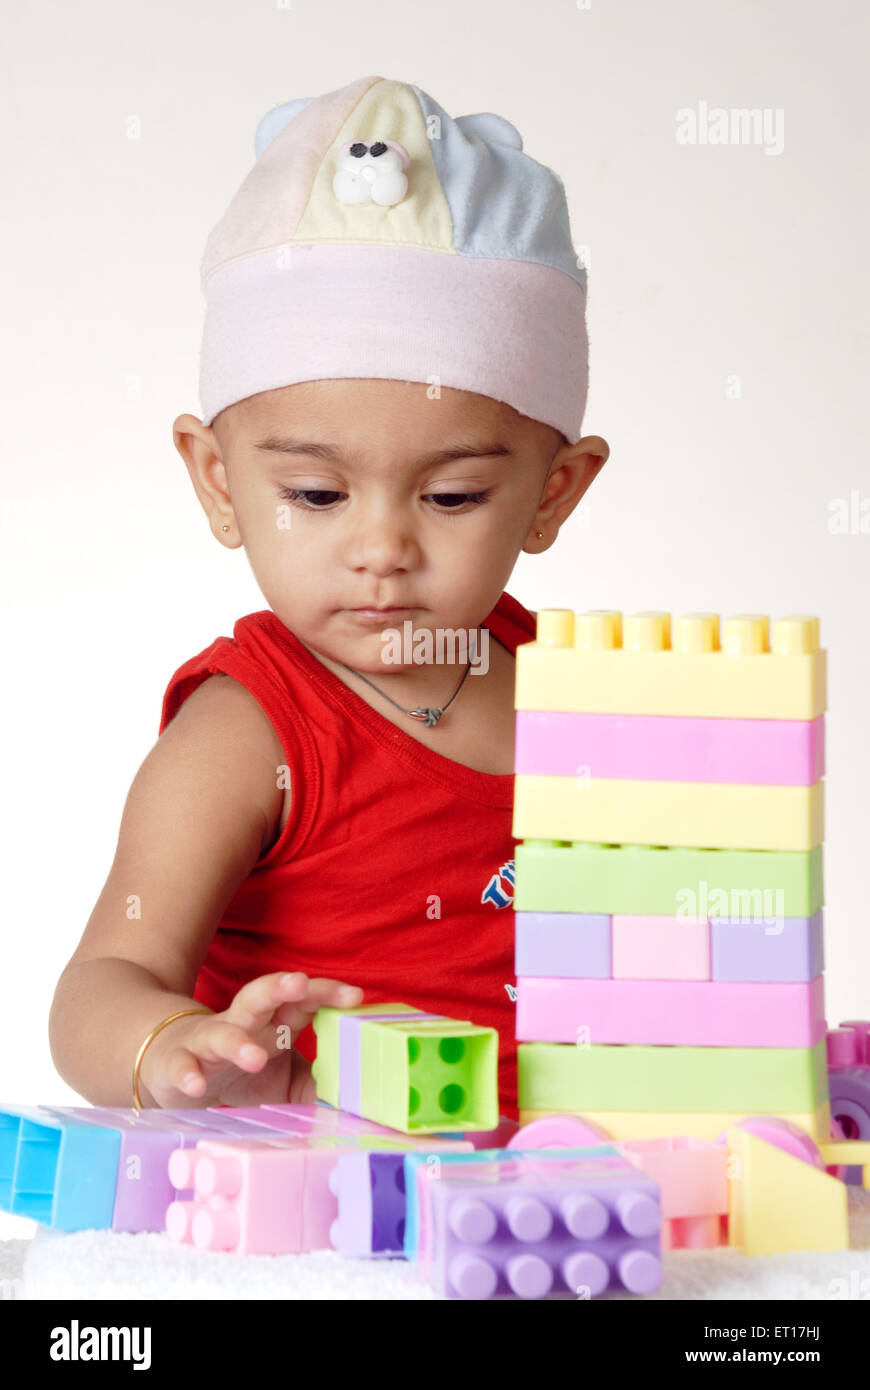 Baby boy playing with plastic construction toy MR#512 Stock Photo